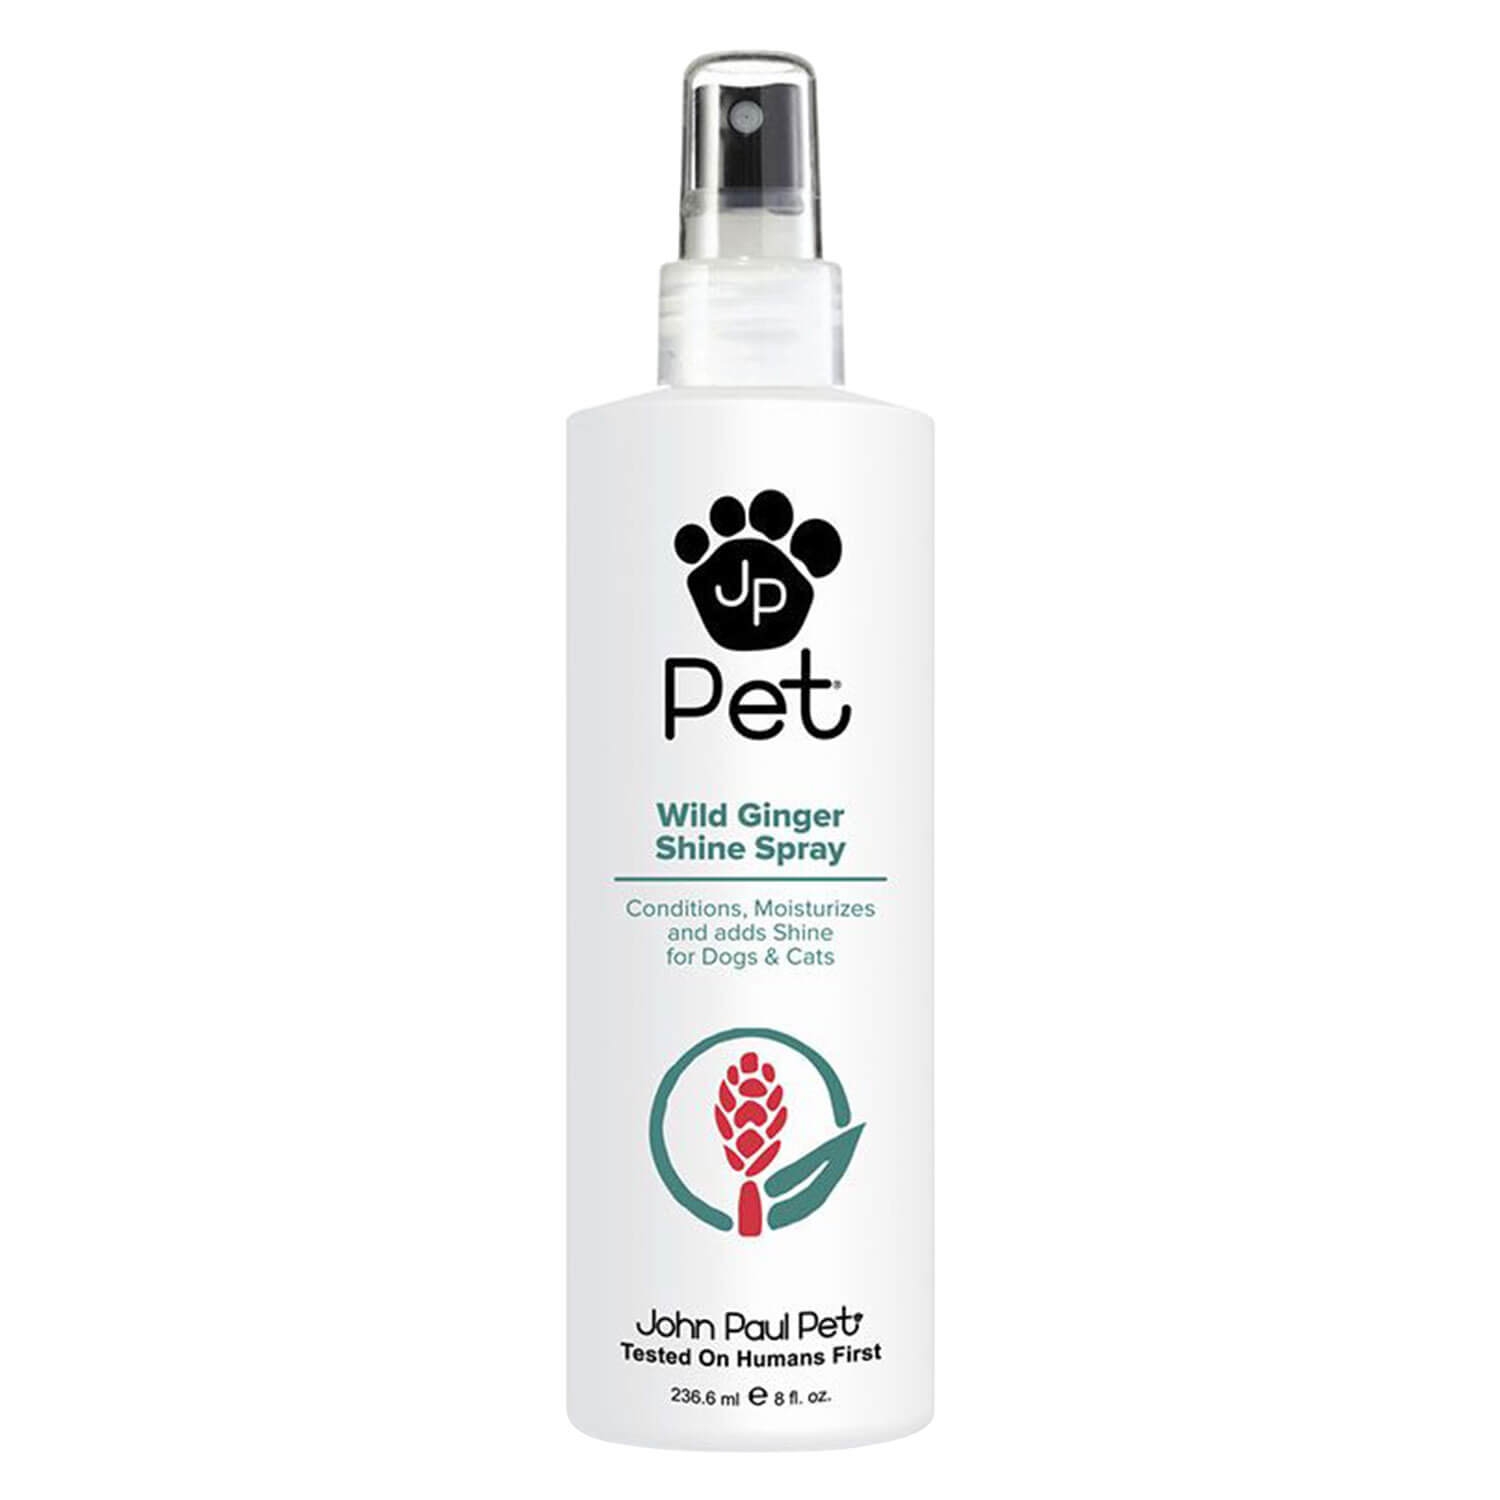 Product image from JP Pet - Wild Ginger Shine Spray